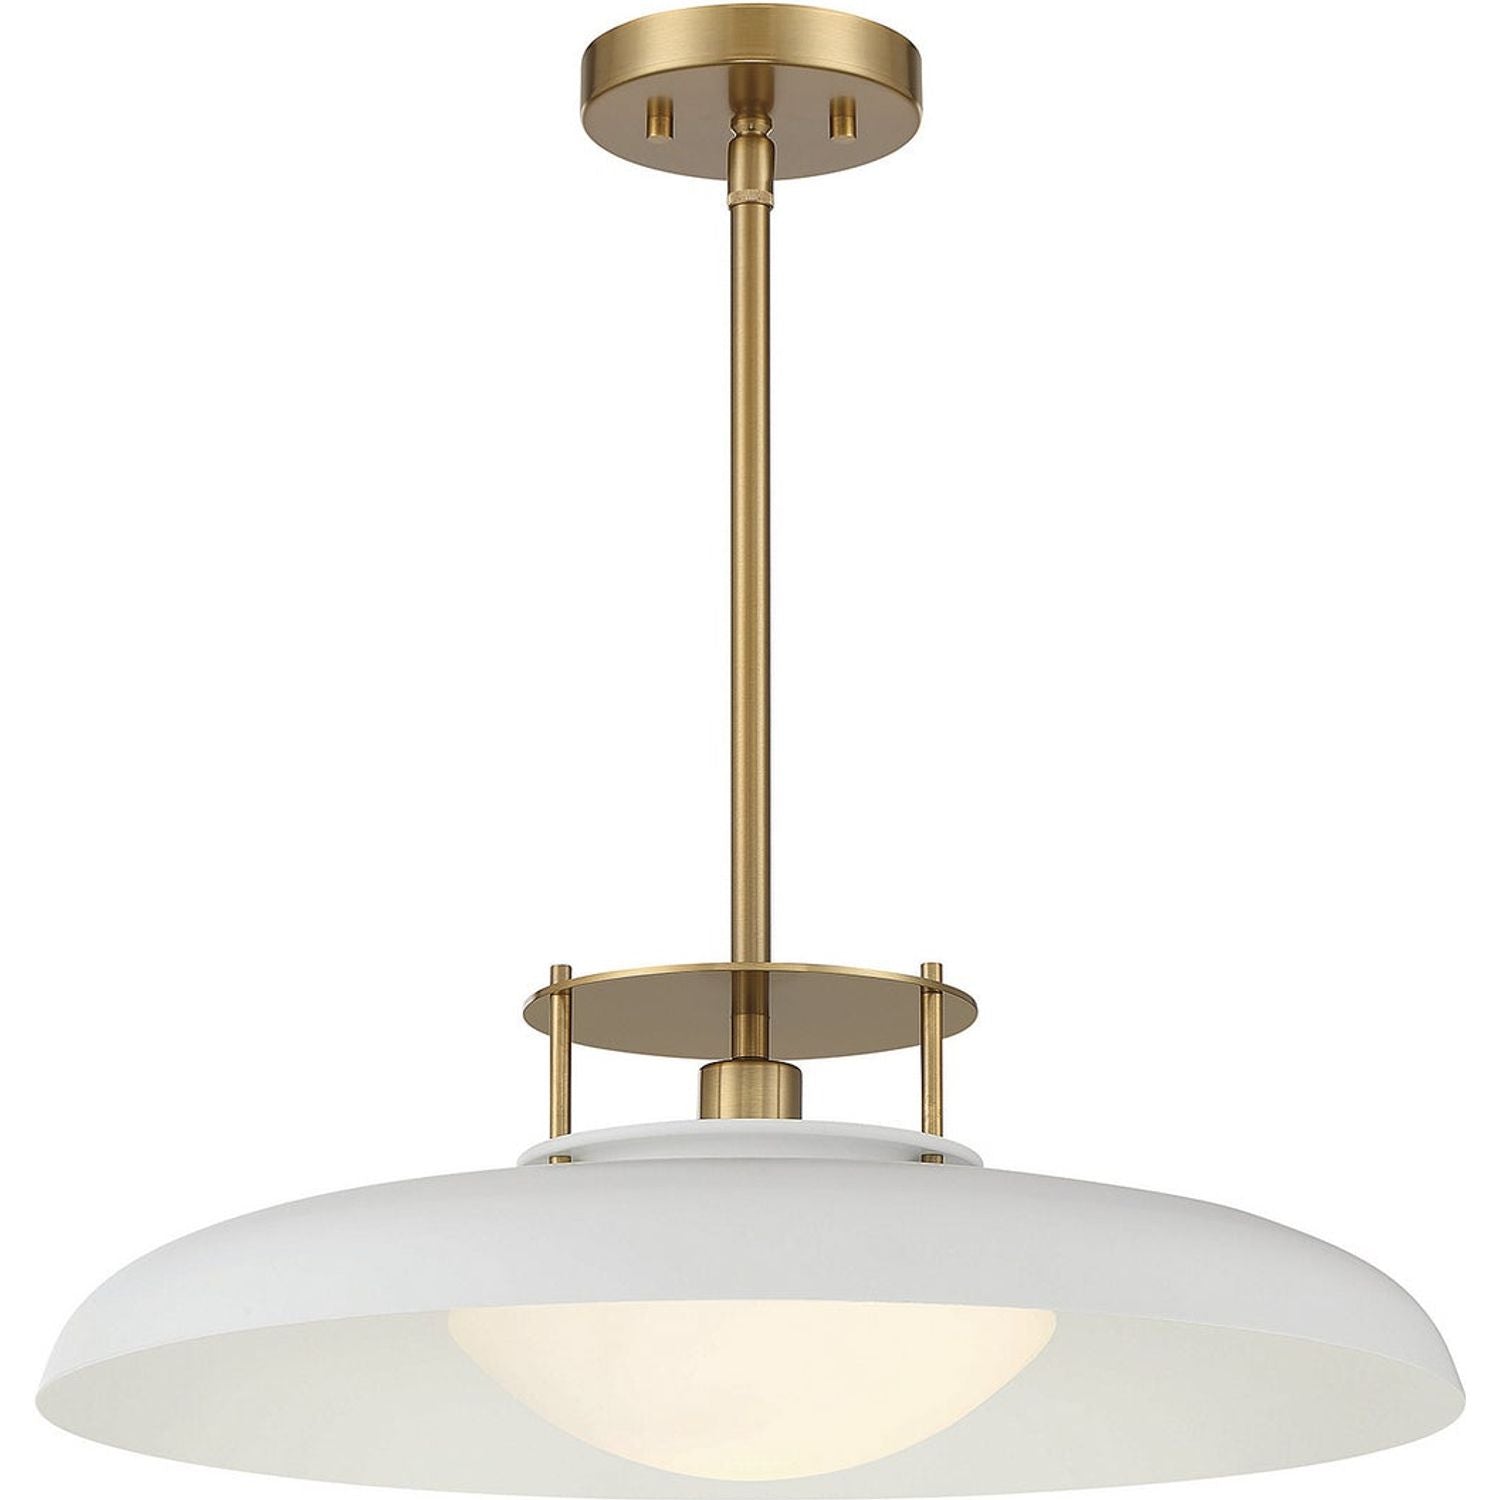 Savoy House - 7-1690-1-142 - One Light Pendant - Gavin - White with Warm Brass Accents